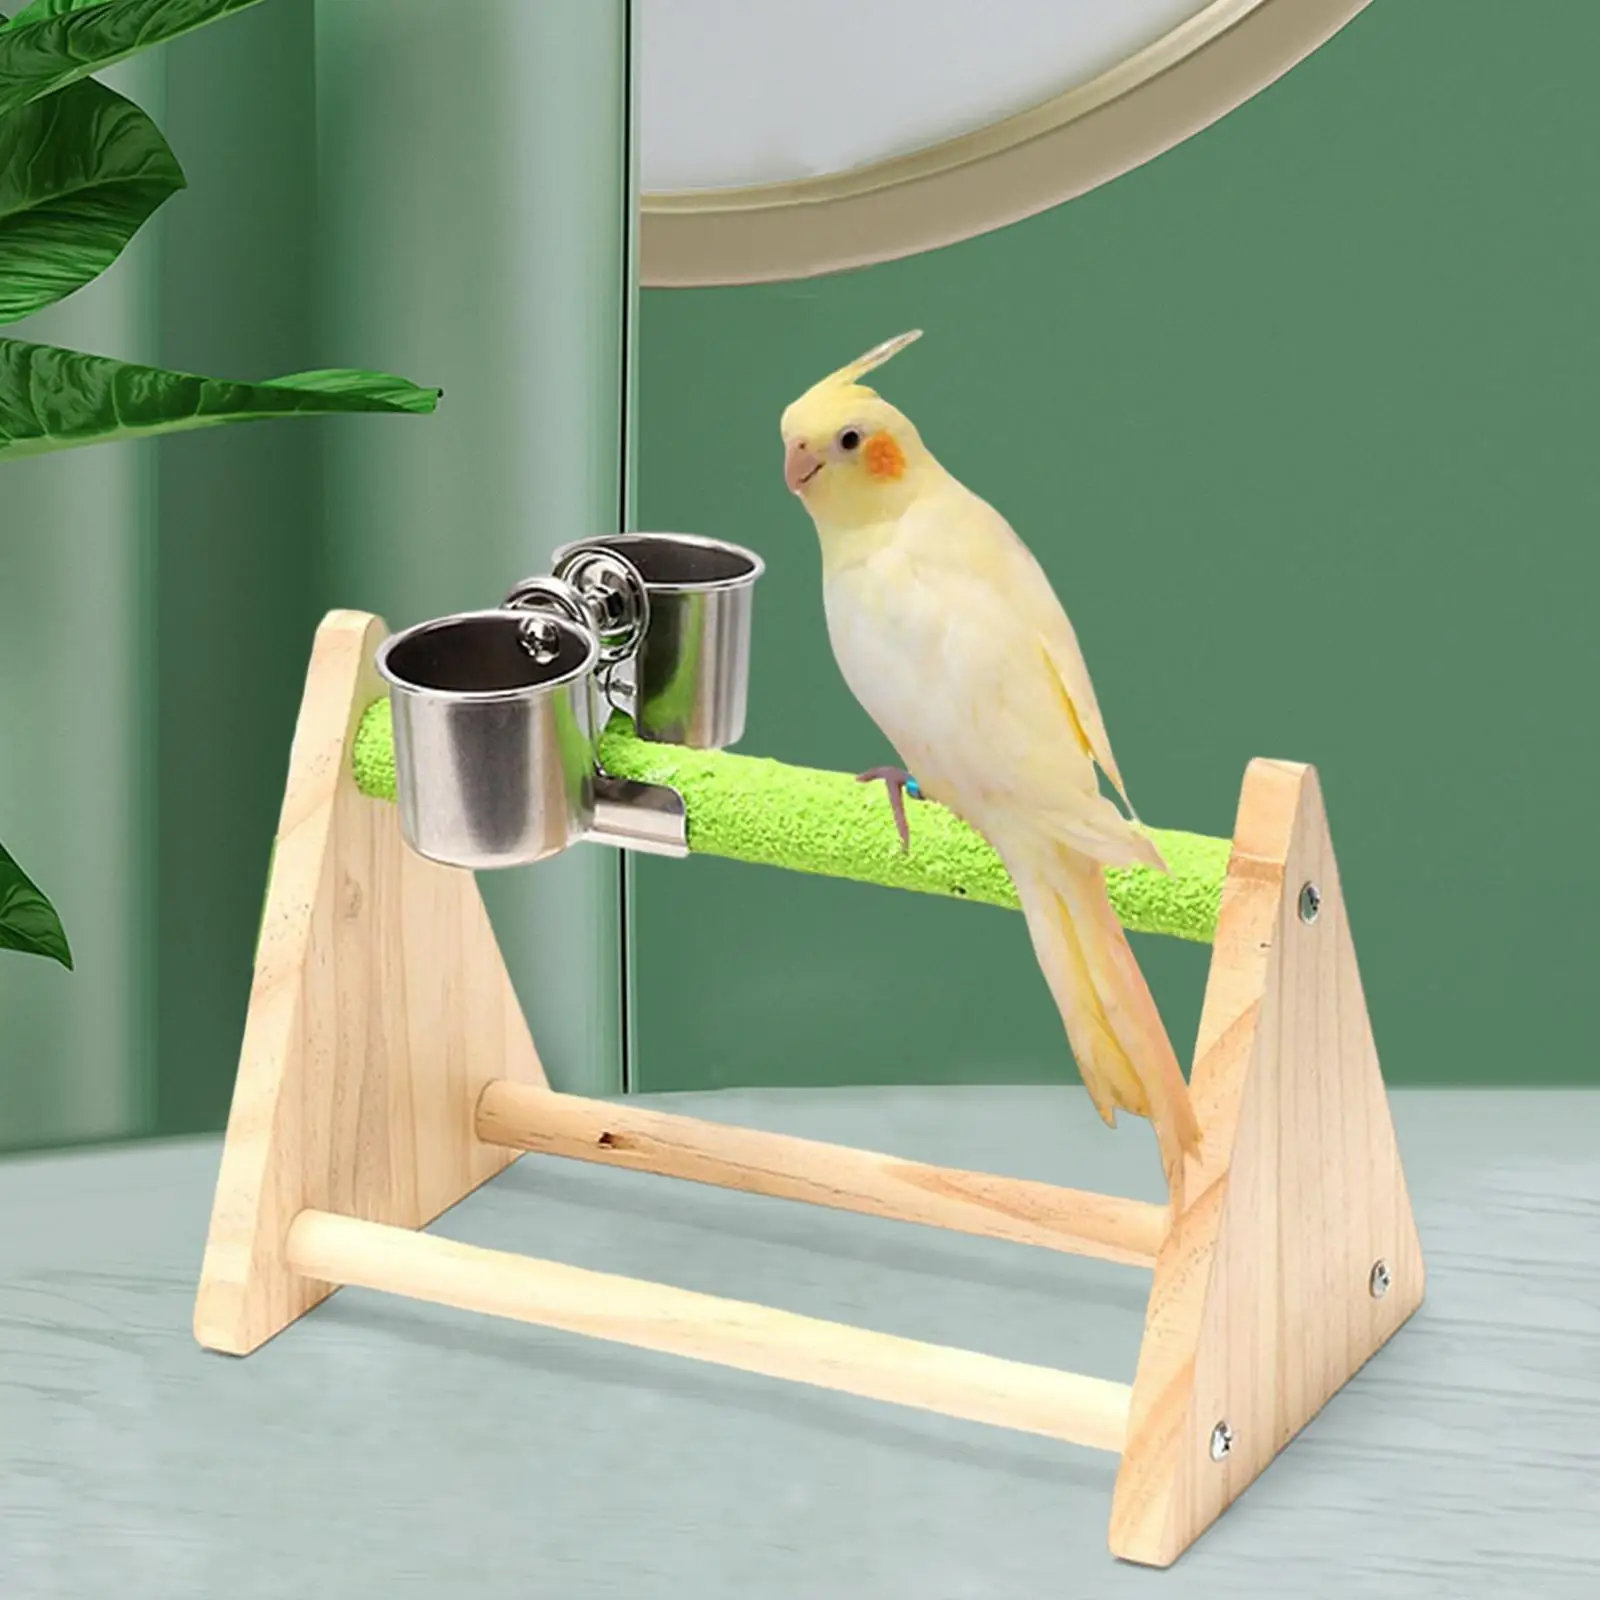 Parrot Playstand with Feeder Cup Roosting Grinding Perch Activity Play Center Bird Feeder stands for Large Bird Finch